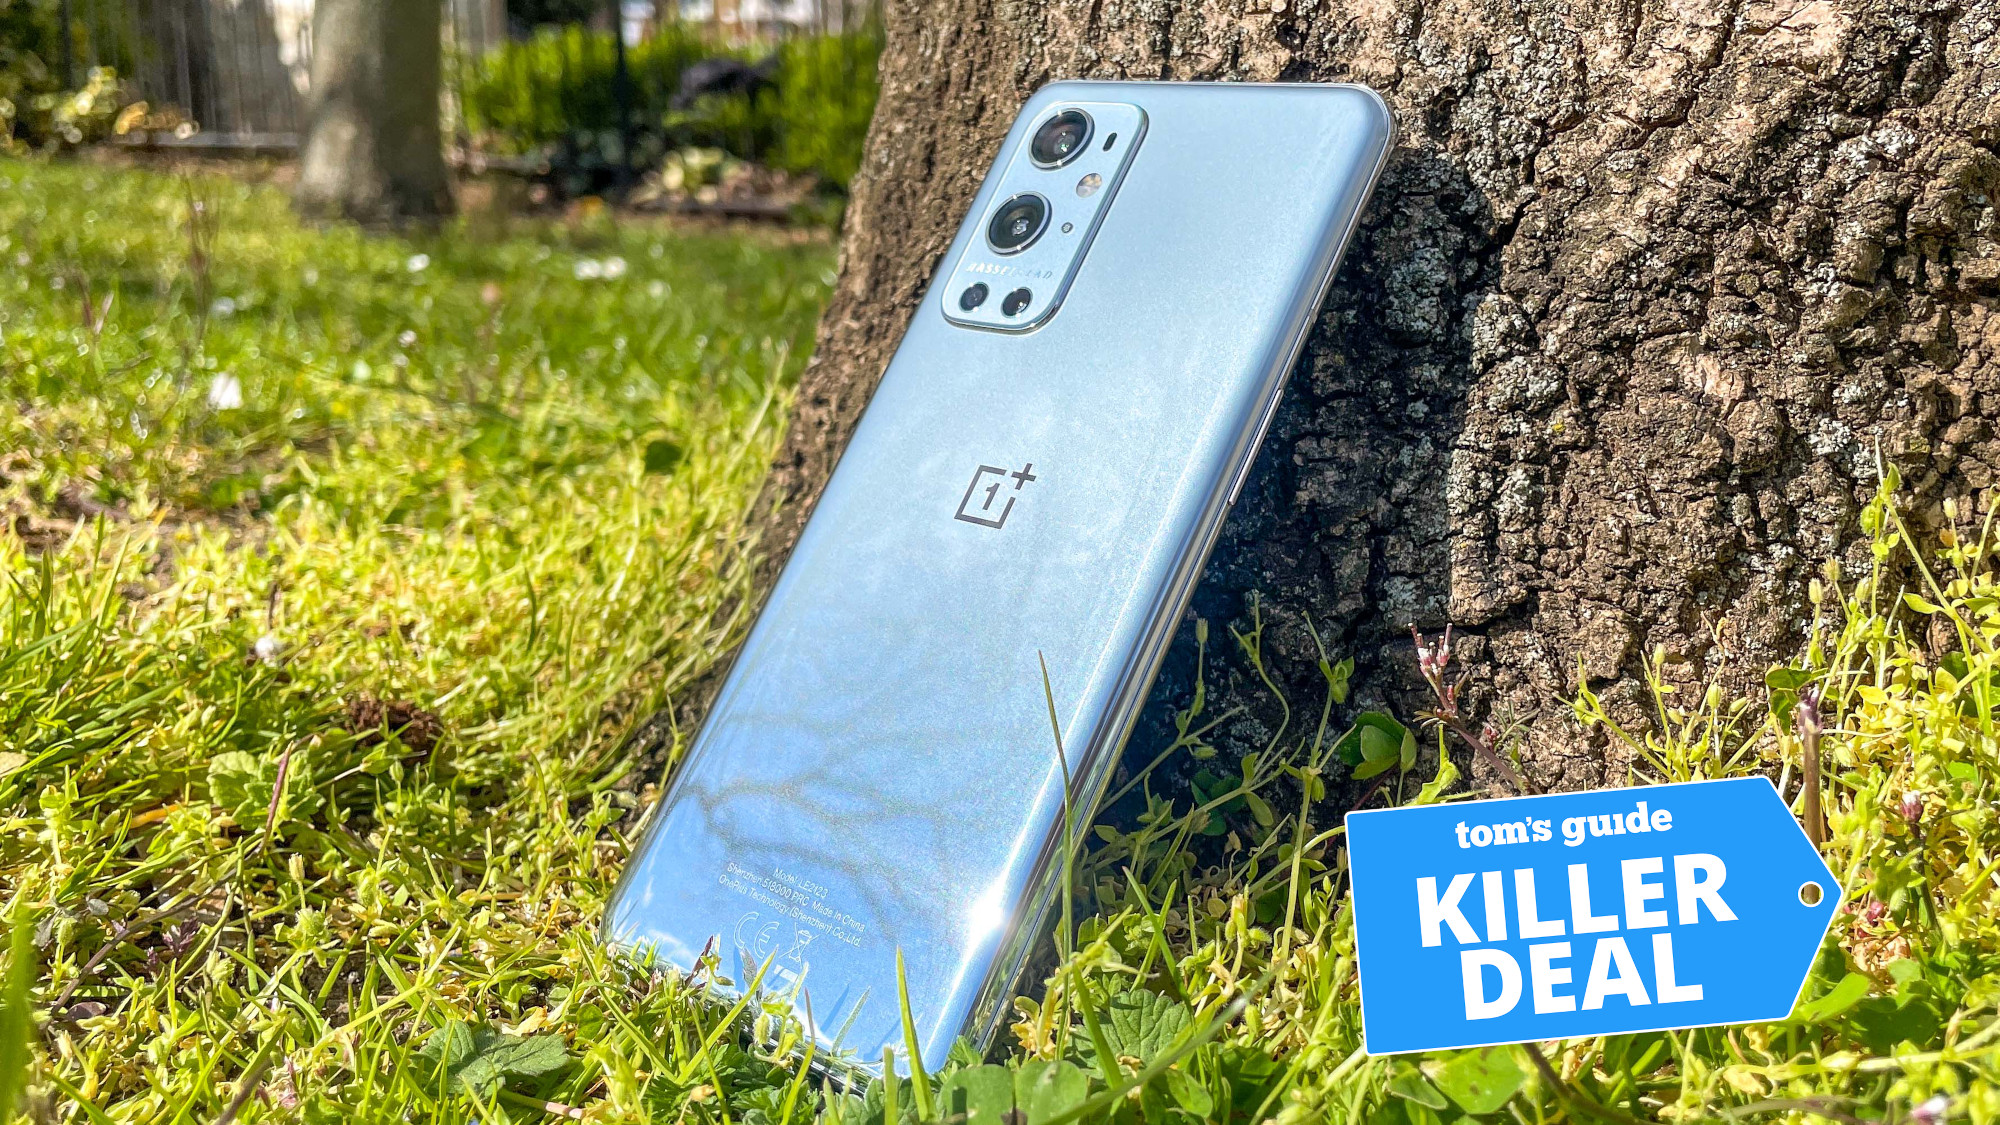 oneplus 9 pro leaning against a tree in the grass with killer deal tag